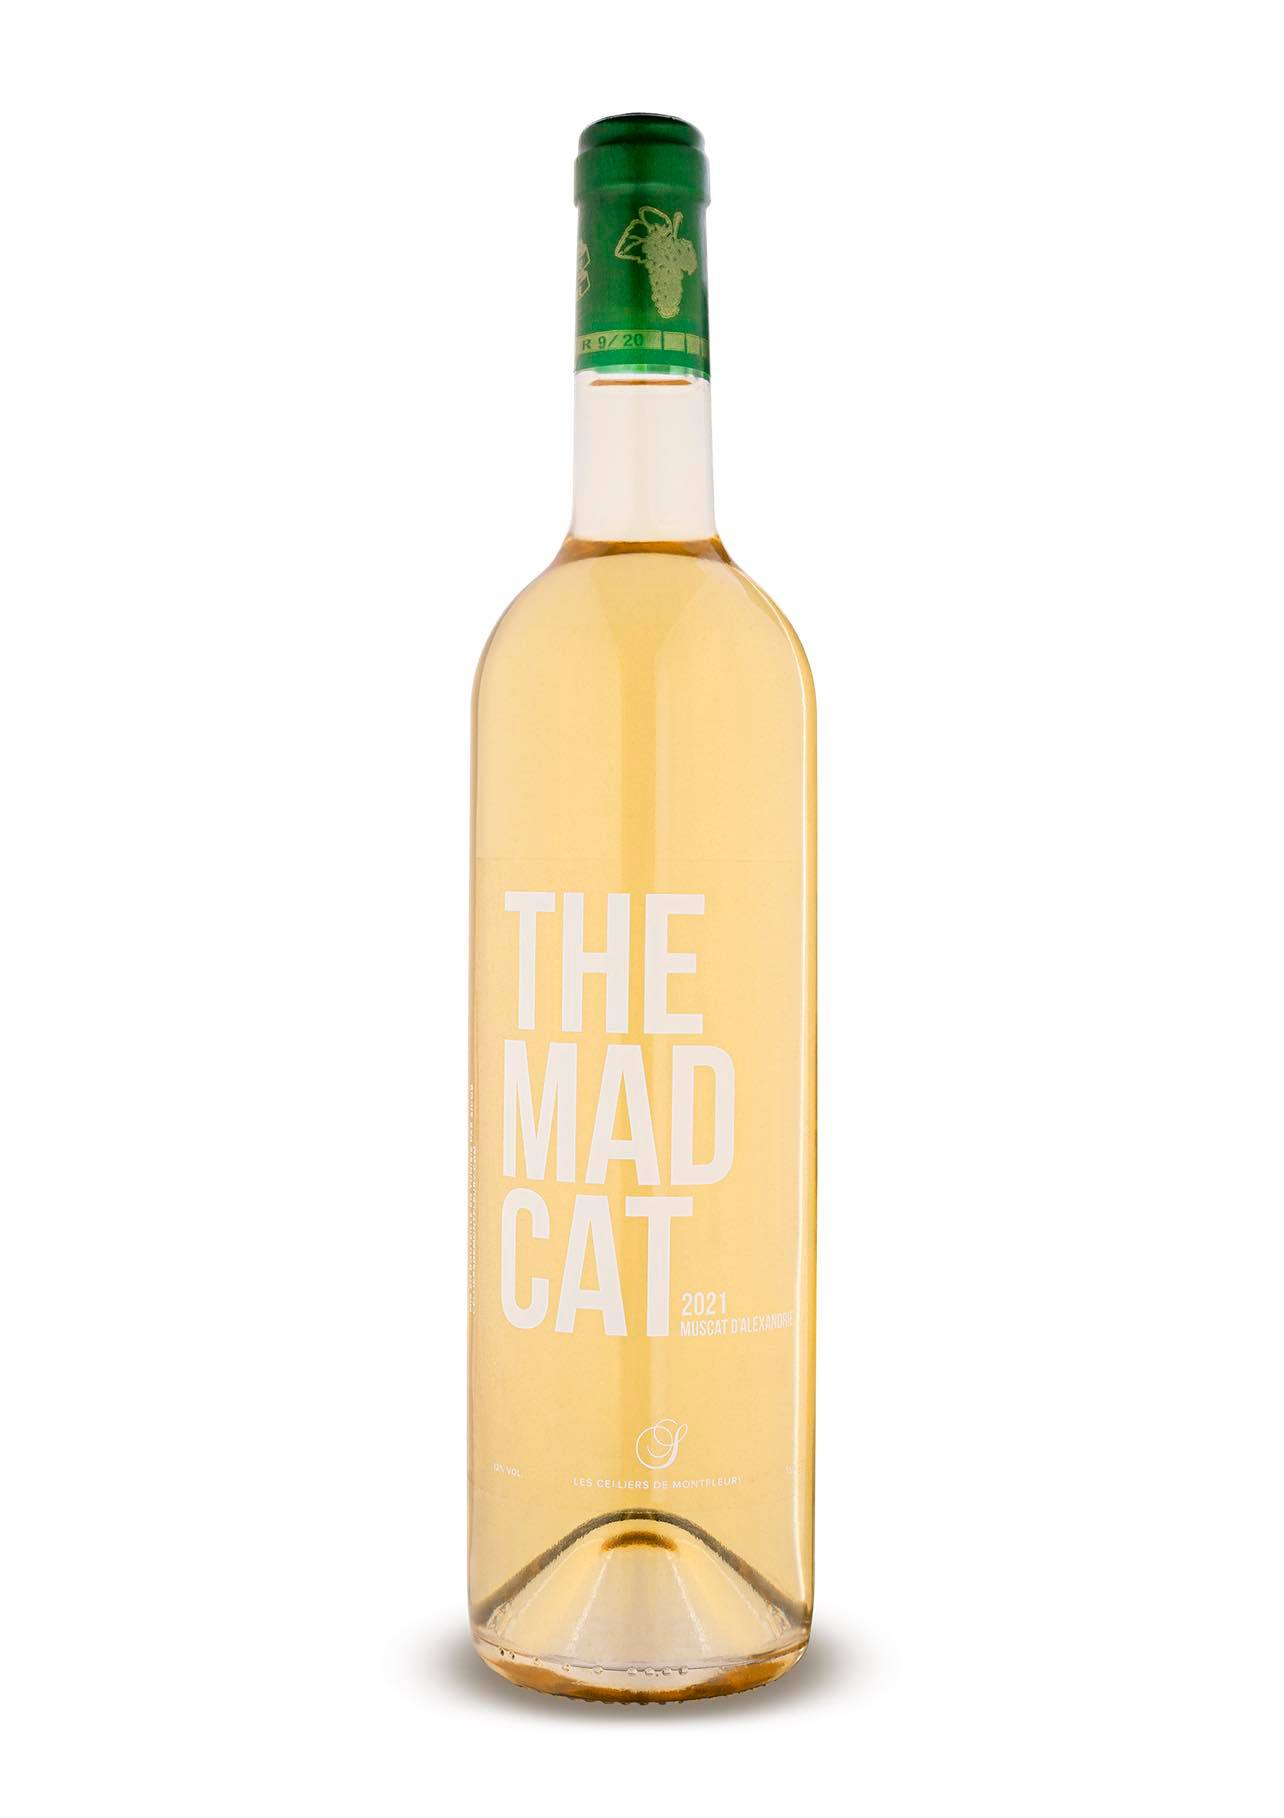 THE MAD CAT (Muscat d'Alexandrie) -BLANC 75CL